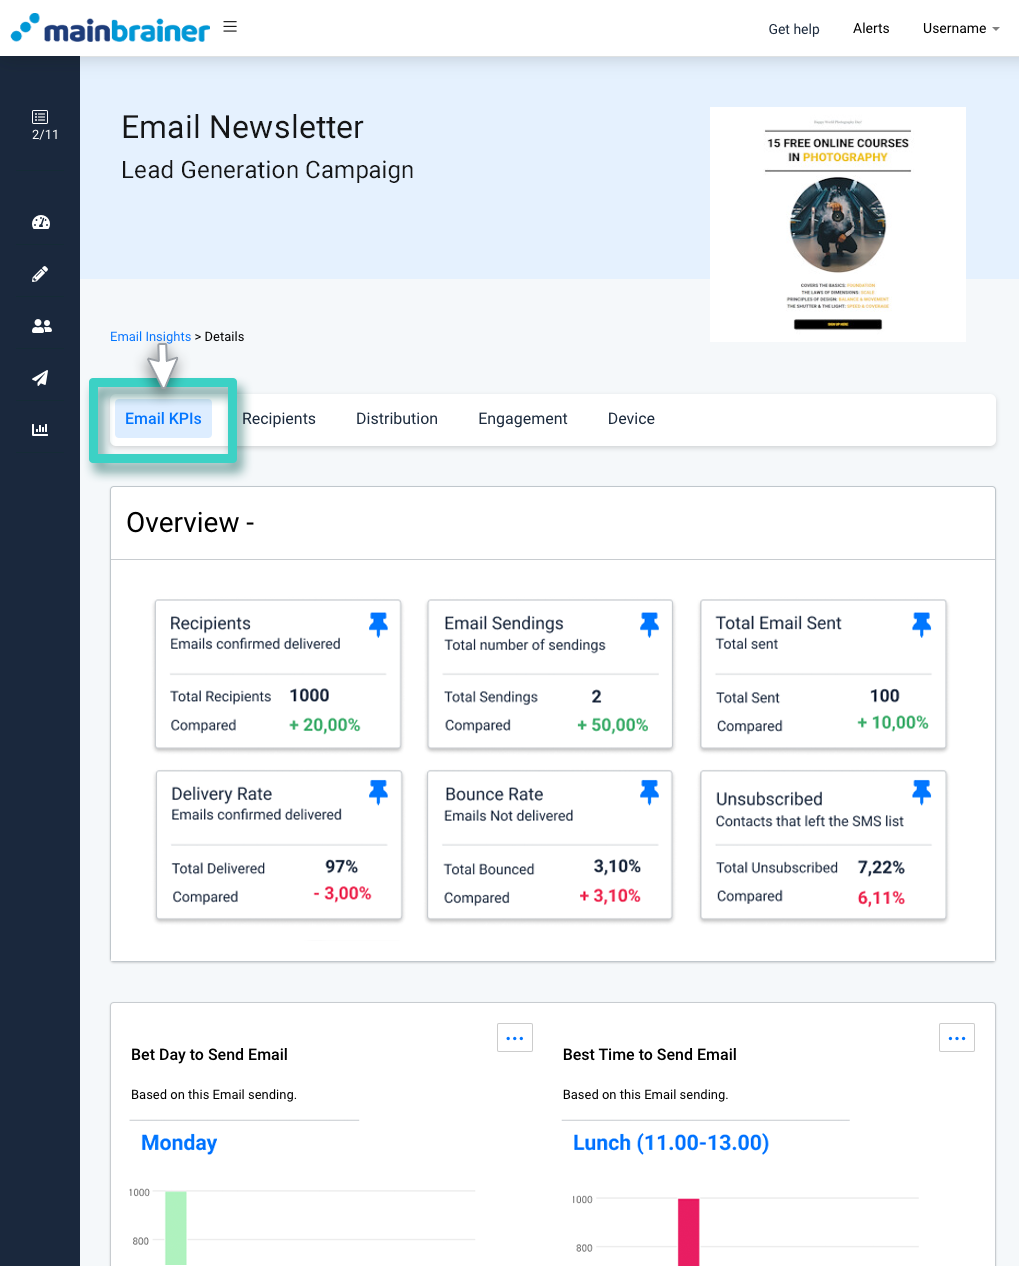 Monitor email performance, insights overview. The email KPIs tab is highlighted